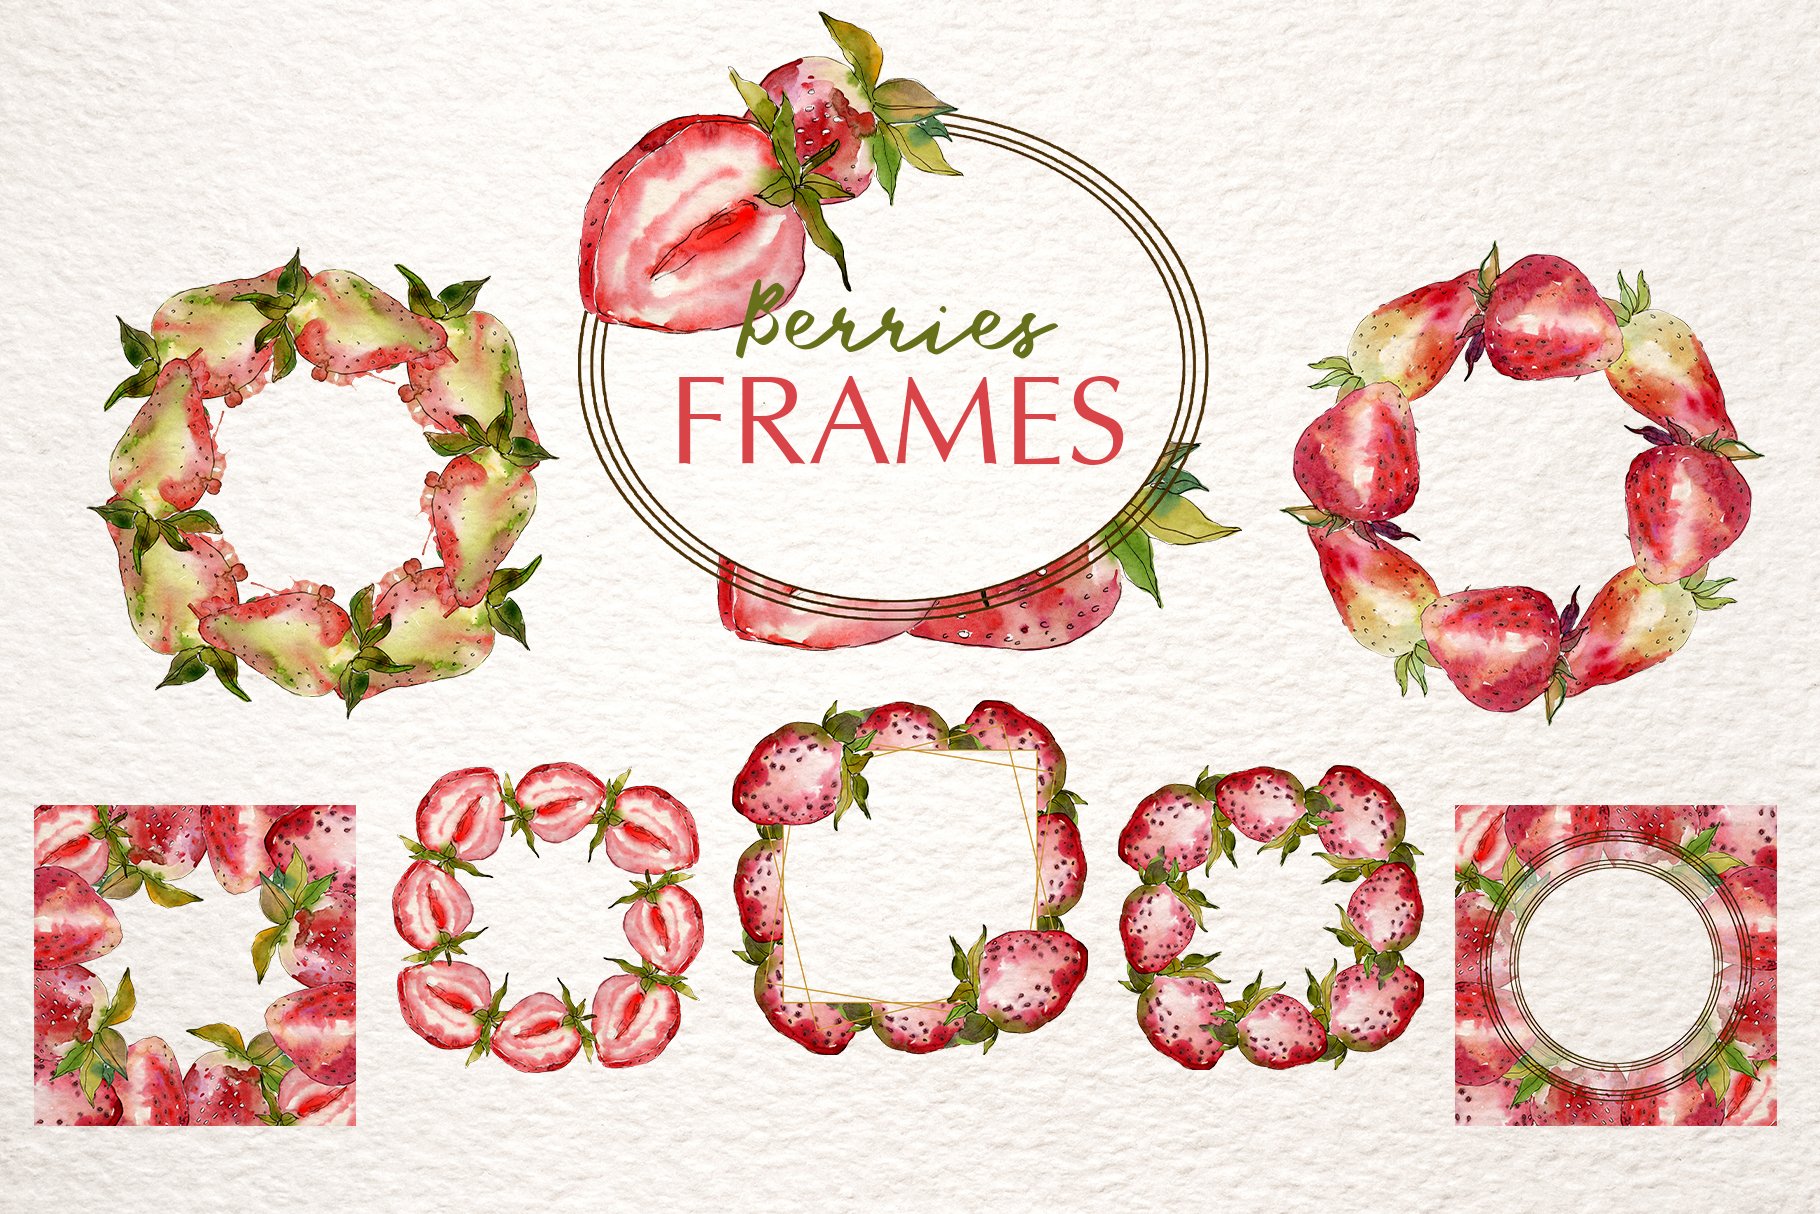 Diverse of the strawberries frames.